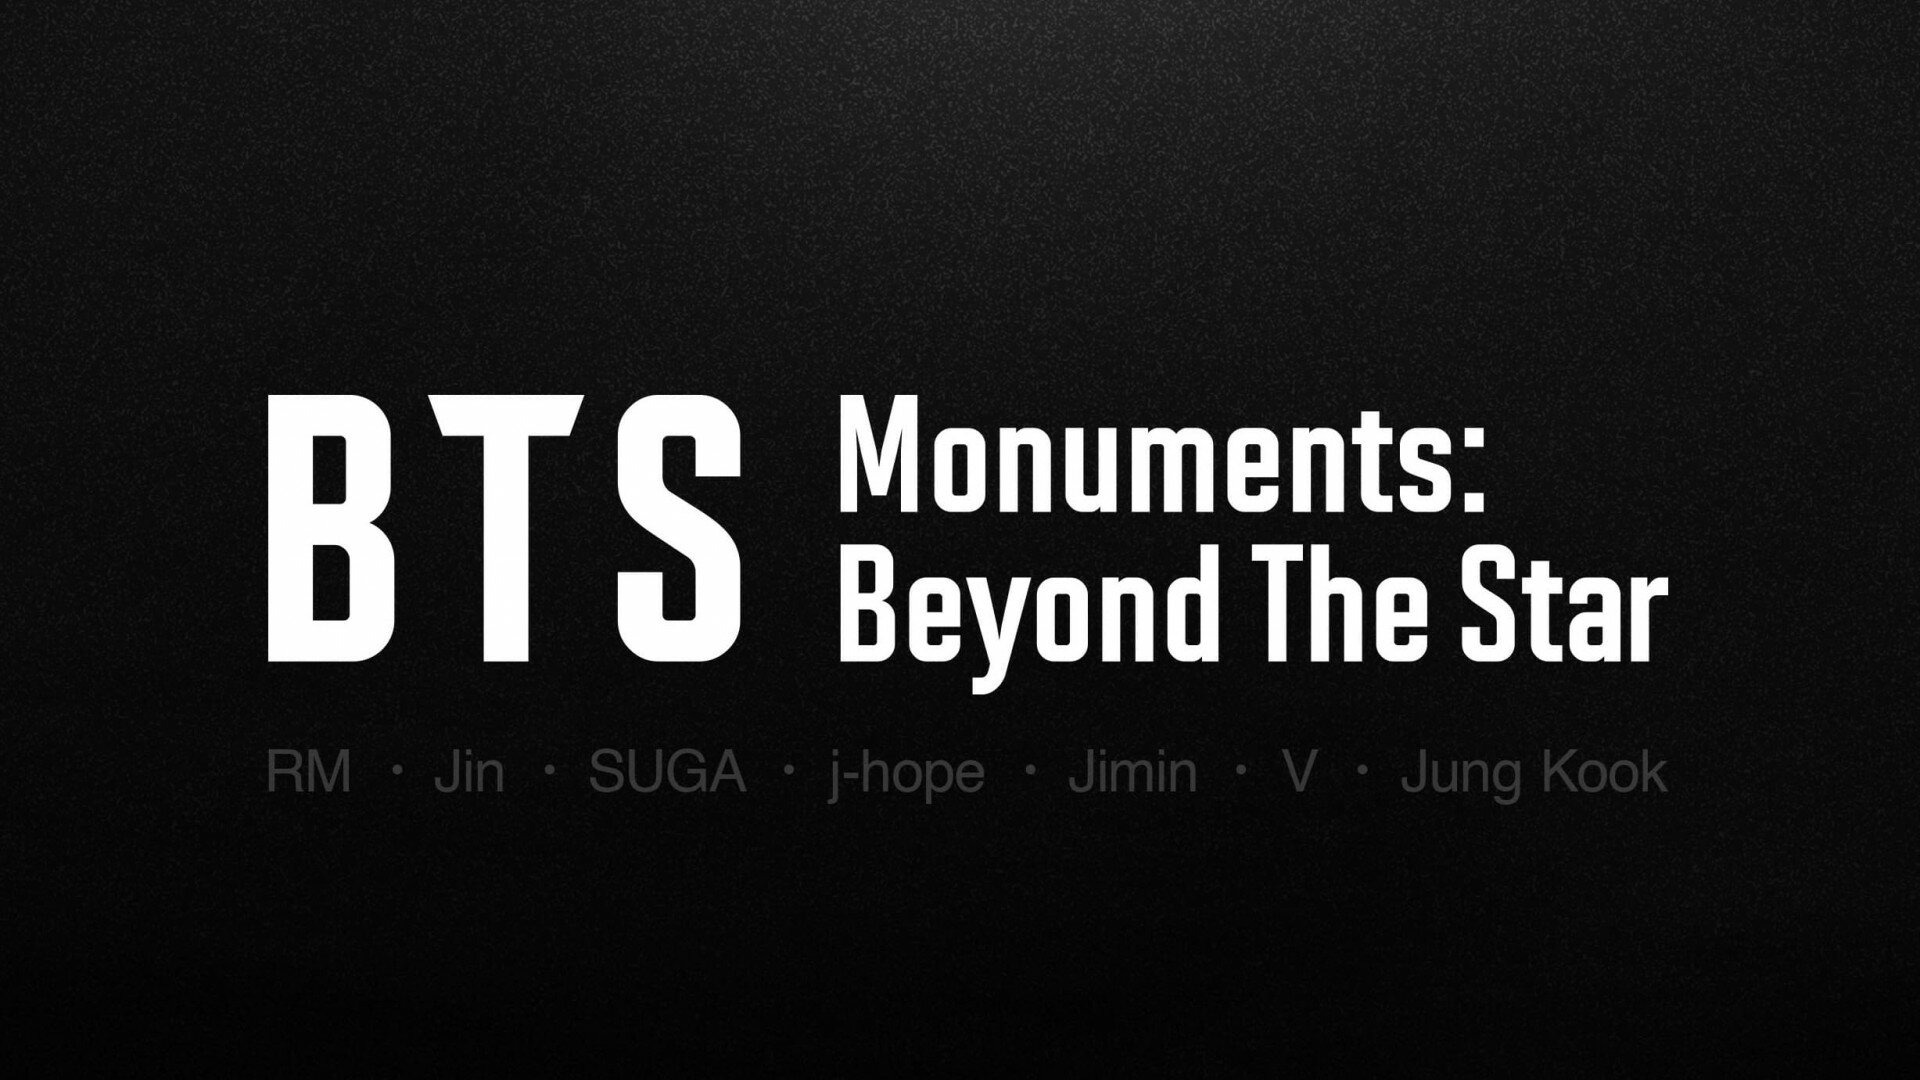 Show BTS Monuments: Beyond the Star